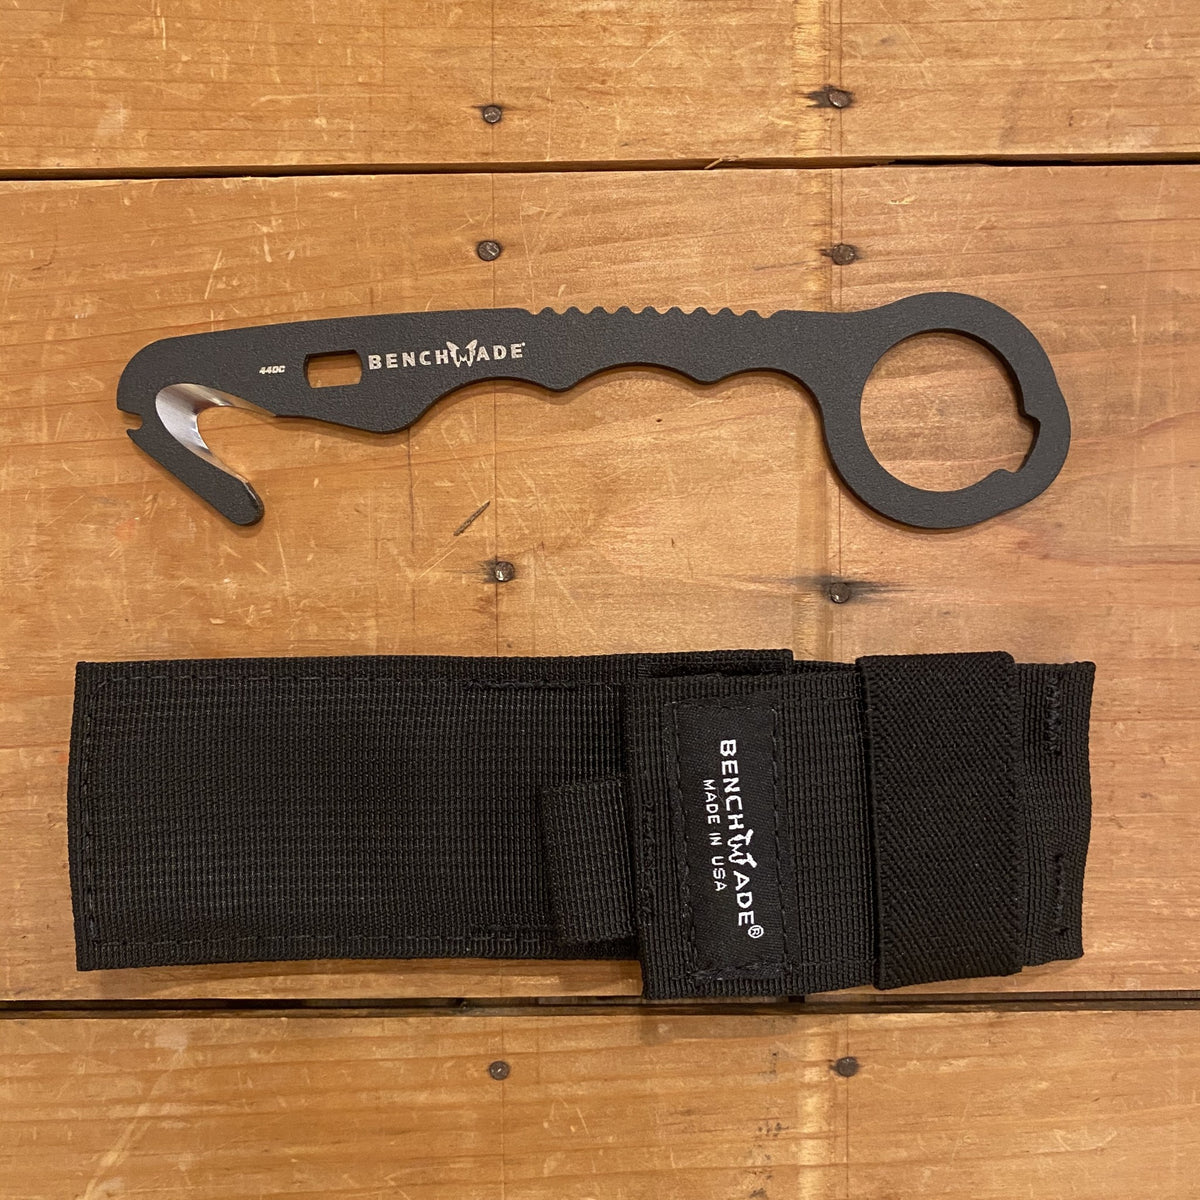 Benchmade 8 BLKWMED Hook 440C Single Piece Handle with O2 Wrench Bottle Opener and Sheath